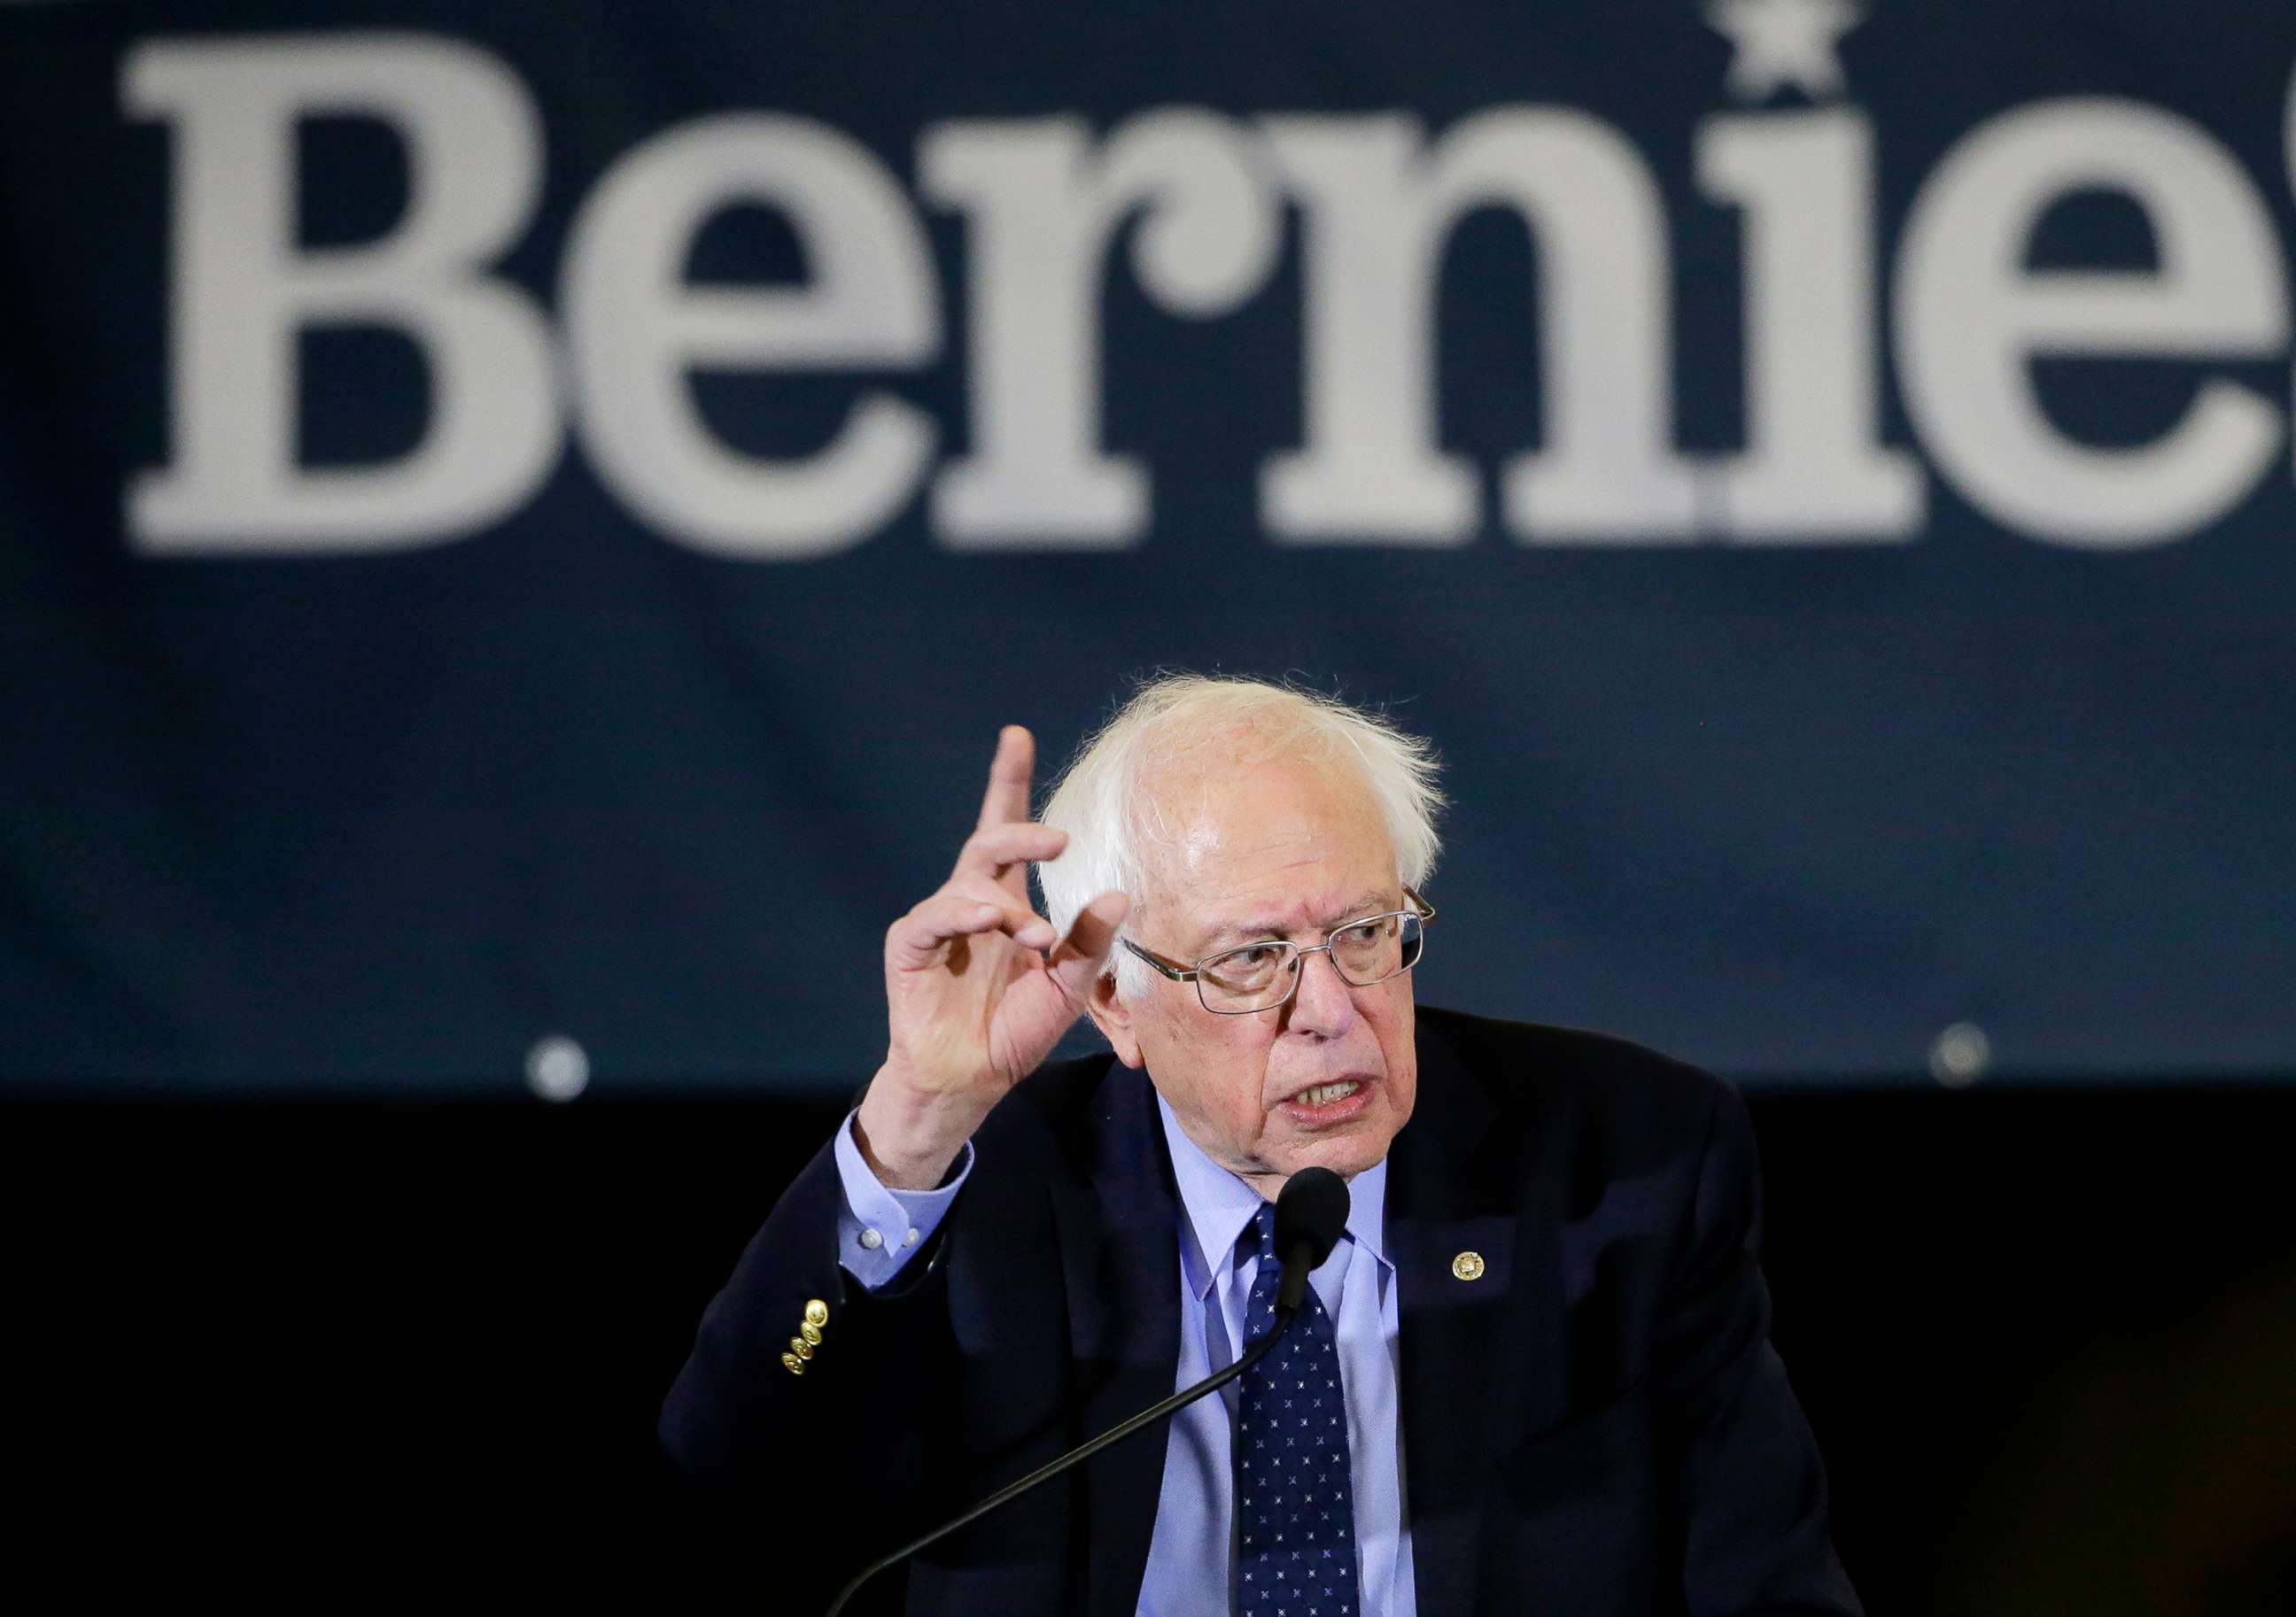 Democratic presidential candidate Sen. Bernie Sanders addresses a rally during a campaign stop in Concord, N.H, March 10, 2019.